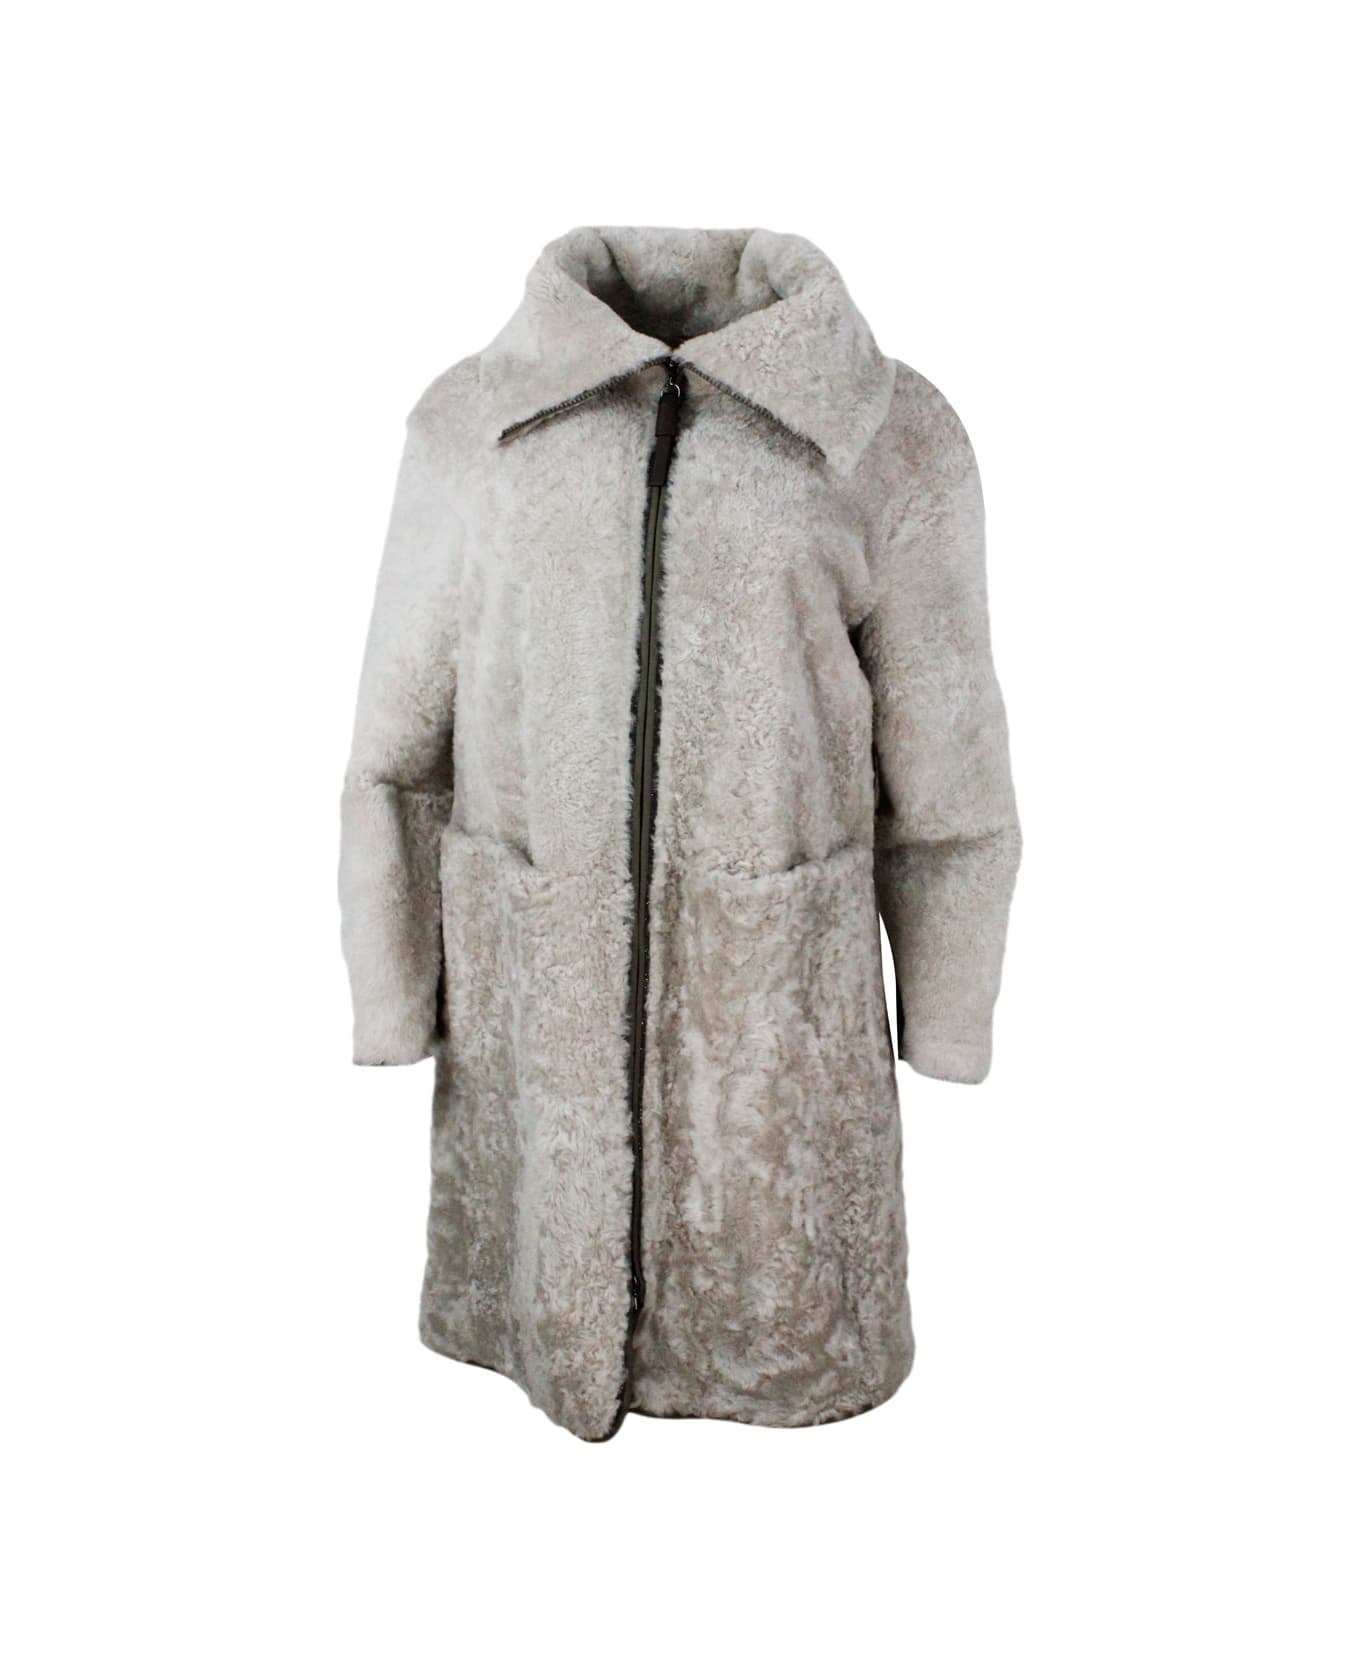 Brunello Cucinelli Long Coat In Precious And Refined Shearling Sheepskin With Zip Closure Embellished With Rows Of Brilliant Jewels And With Front Pockets - Beige